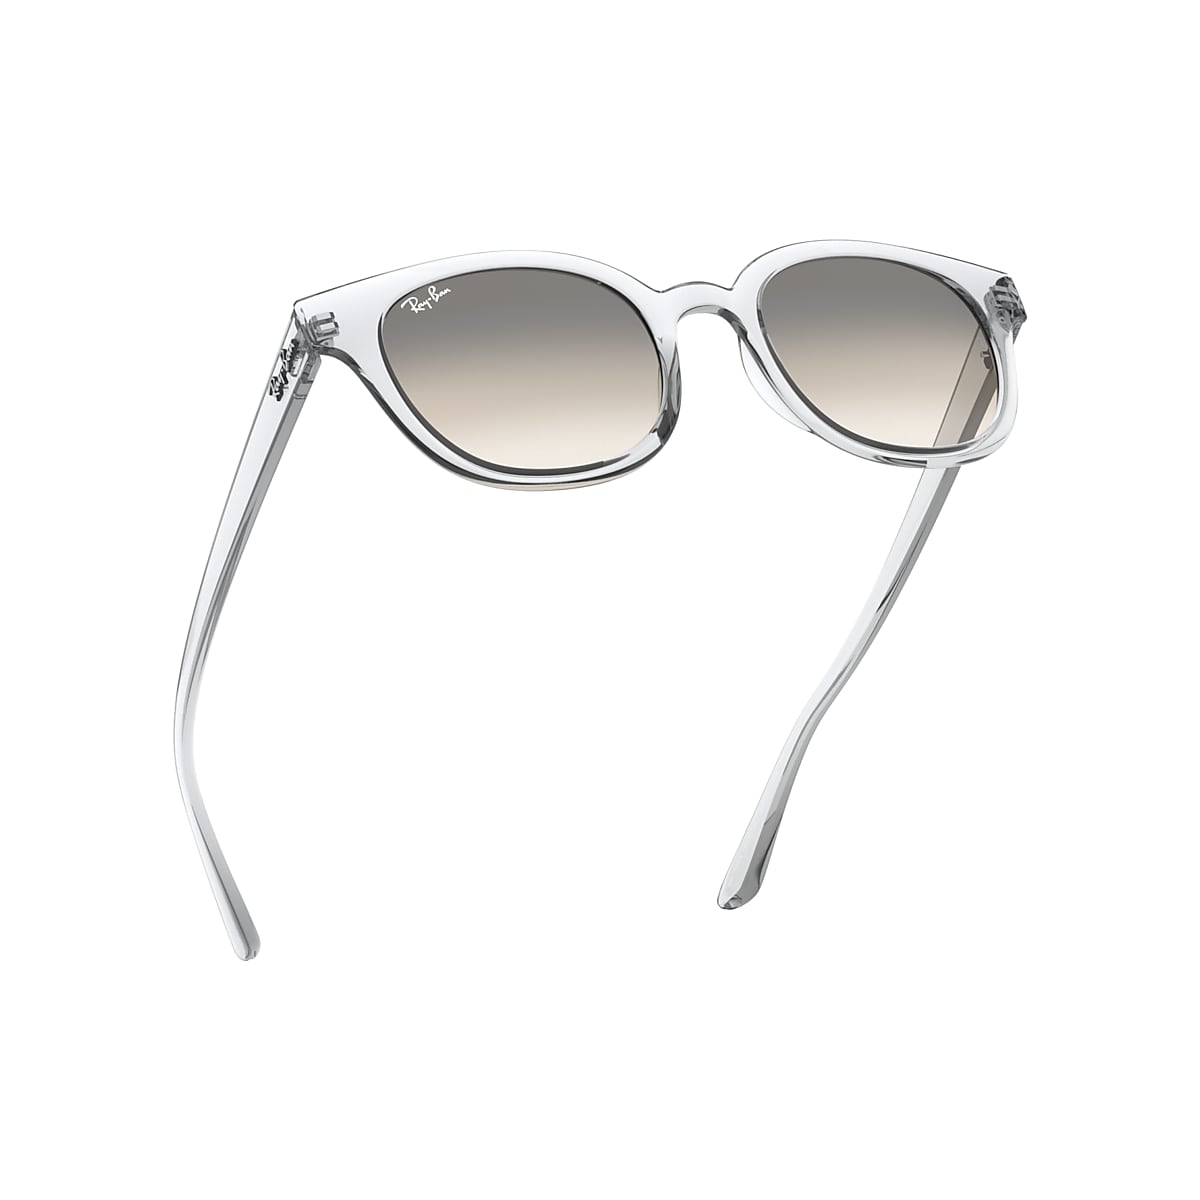 Rb4324 Sunglasses in Transparent and Light Grey | Ray-Ban®